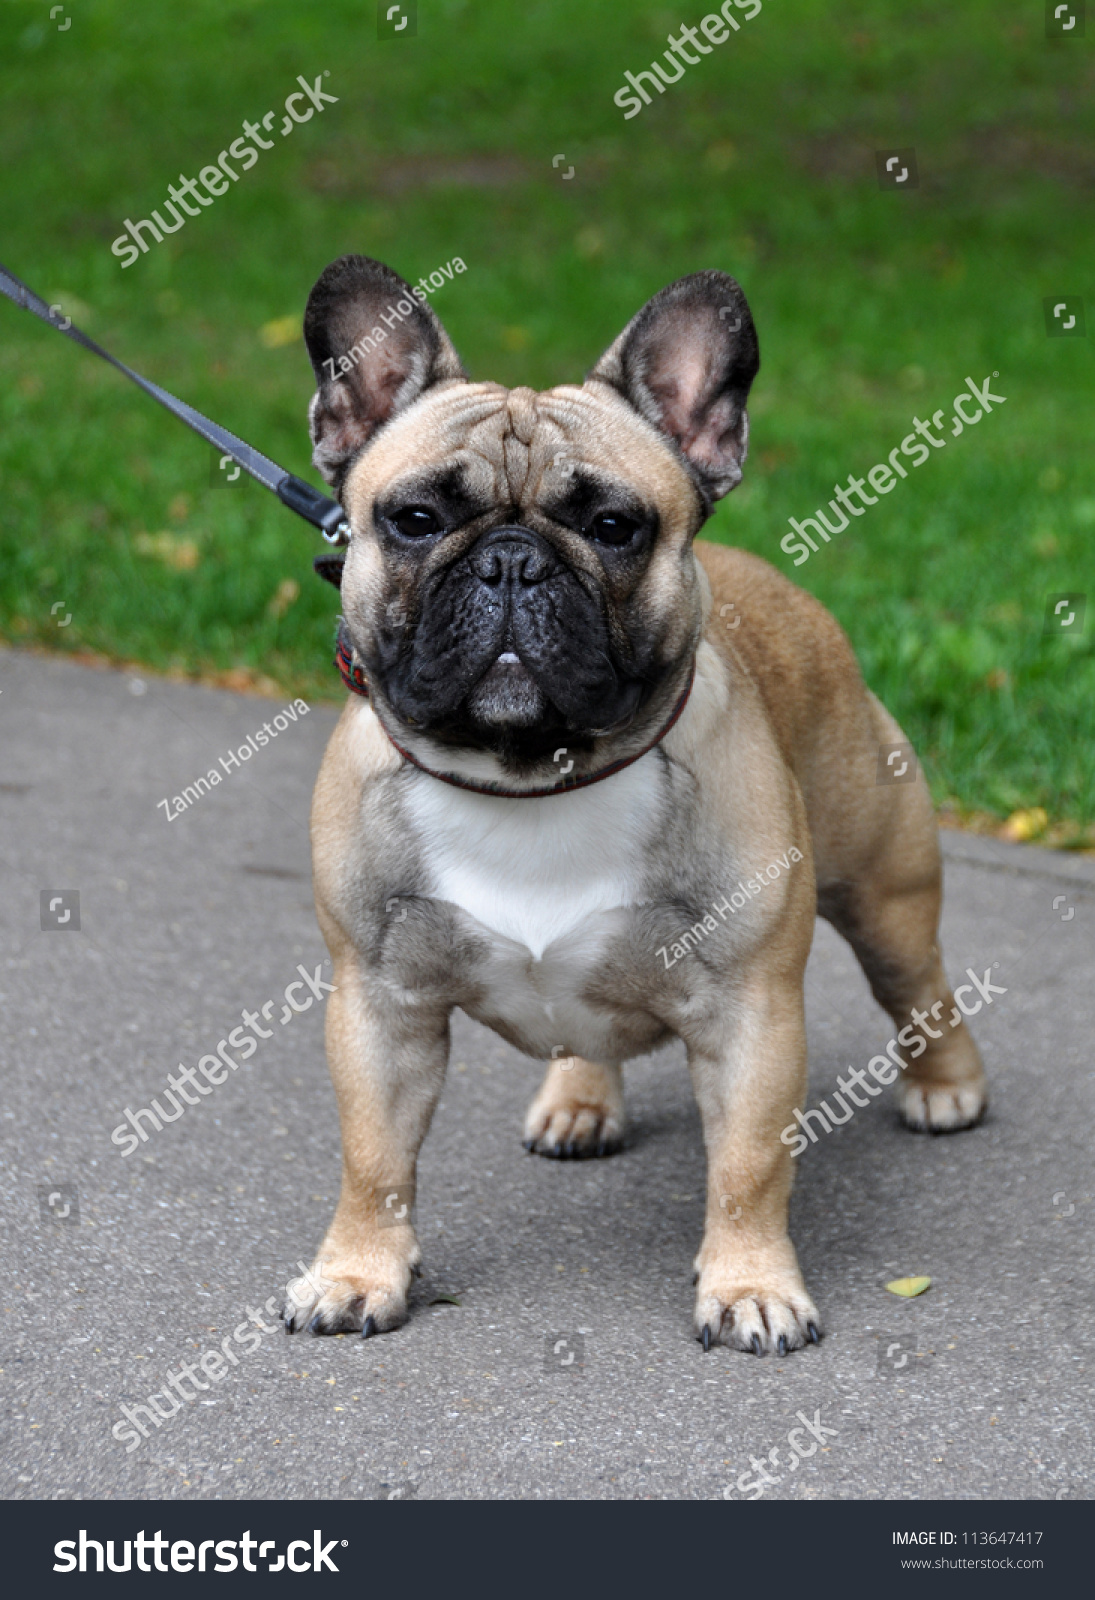 French Bulldog Walking In The Park On A Leash. The French Bulldog ...